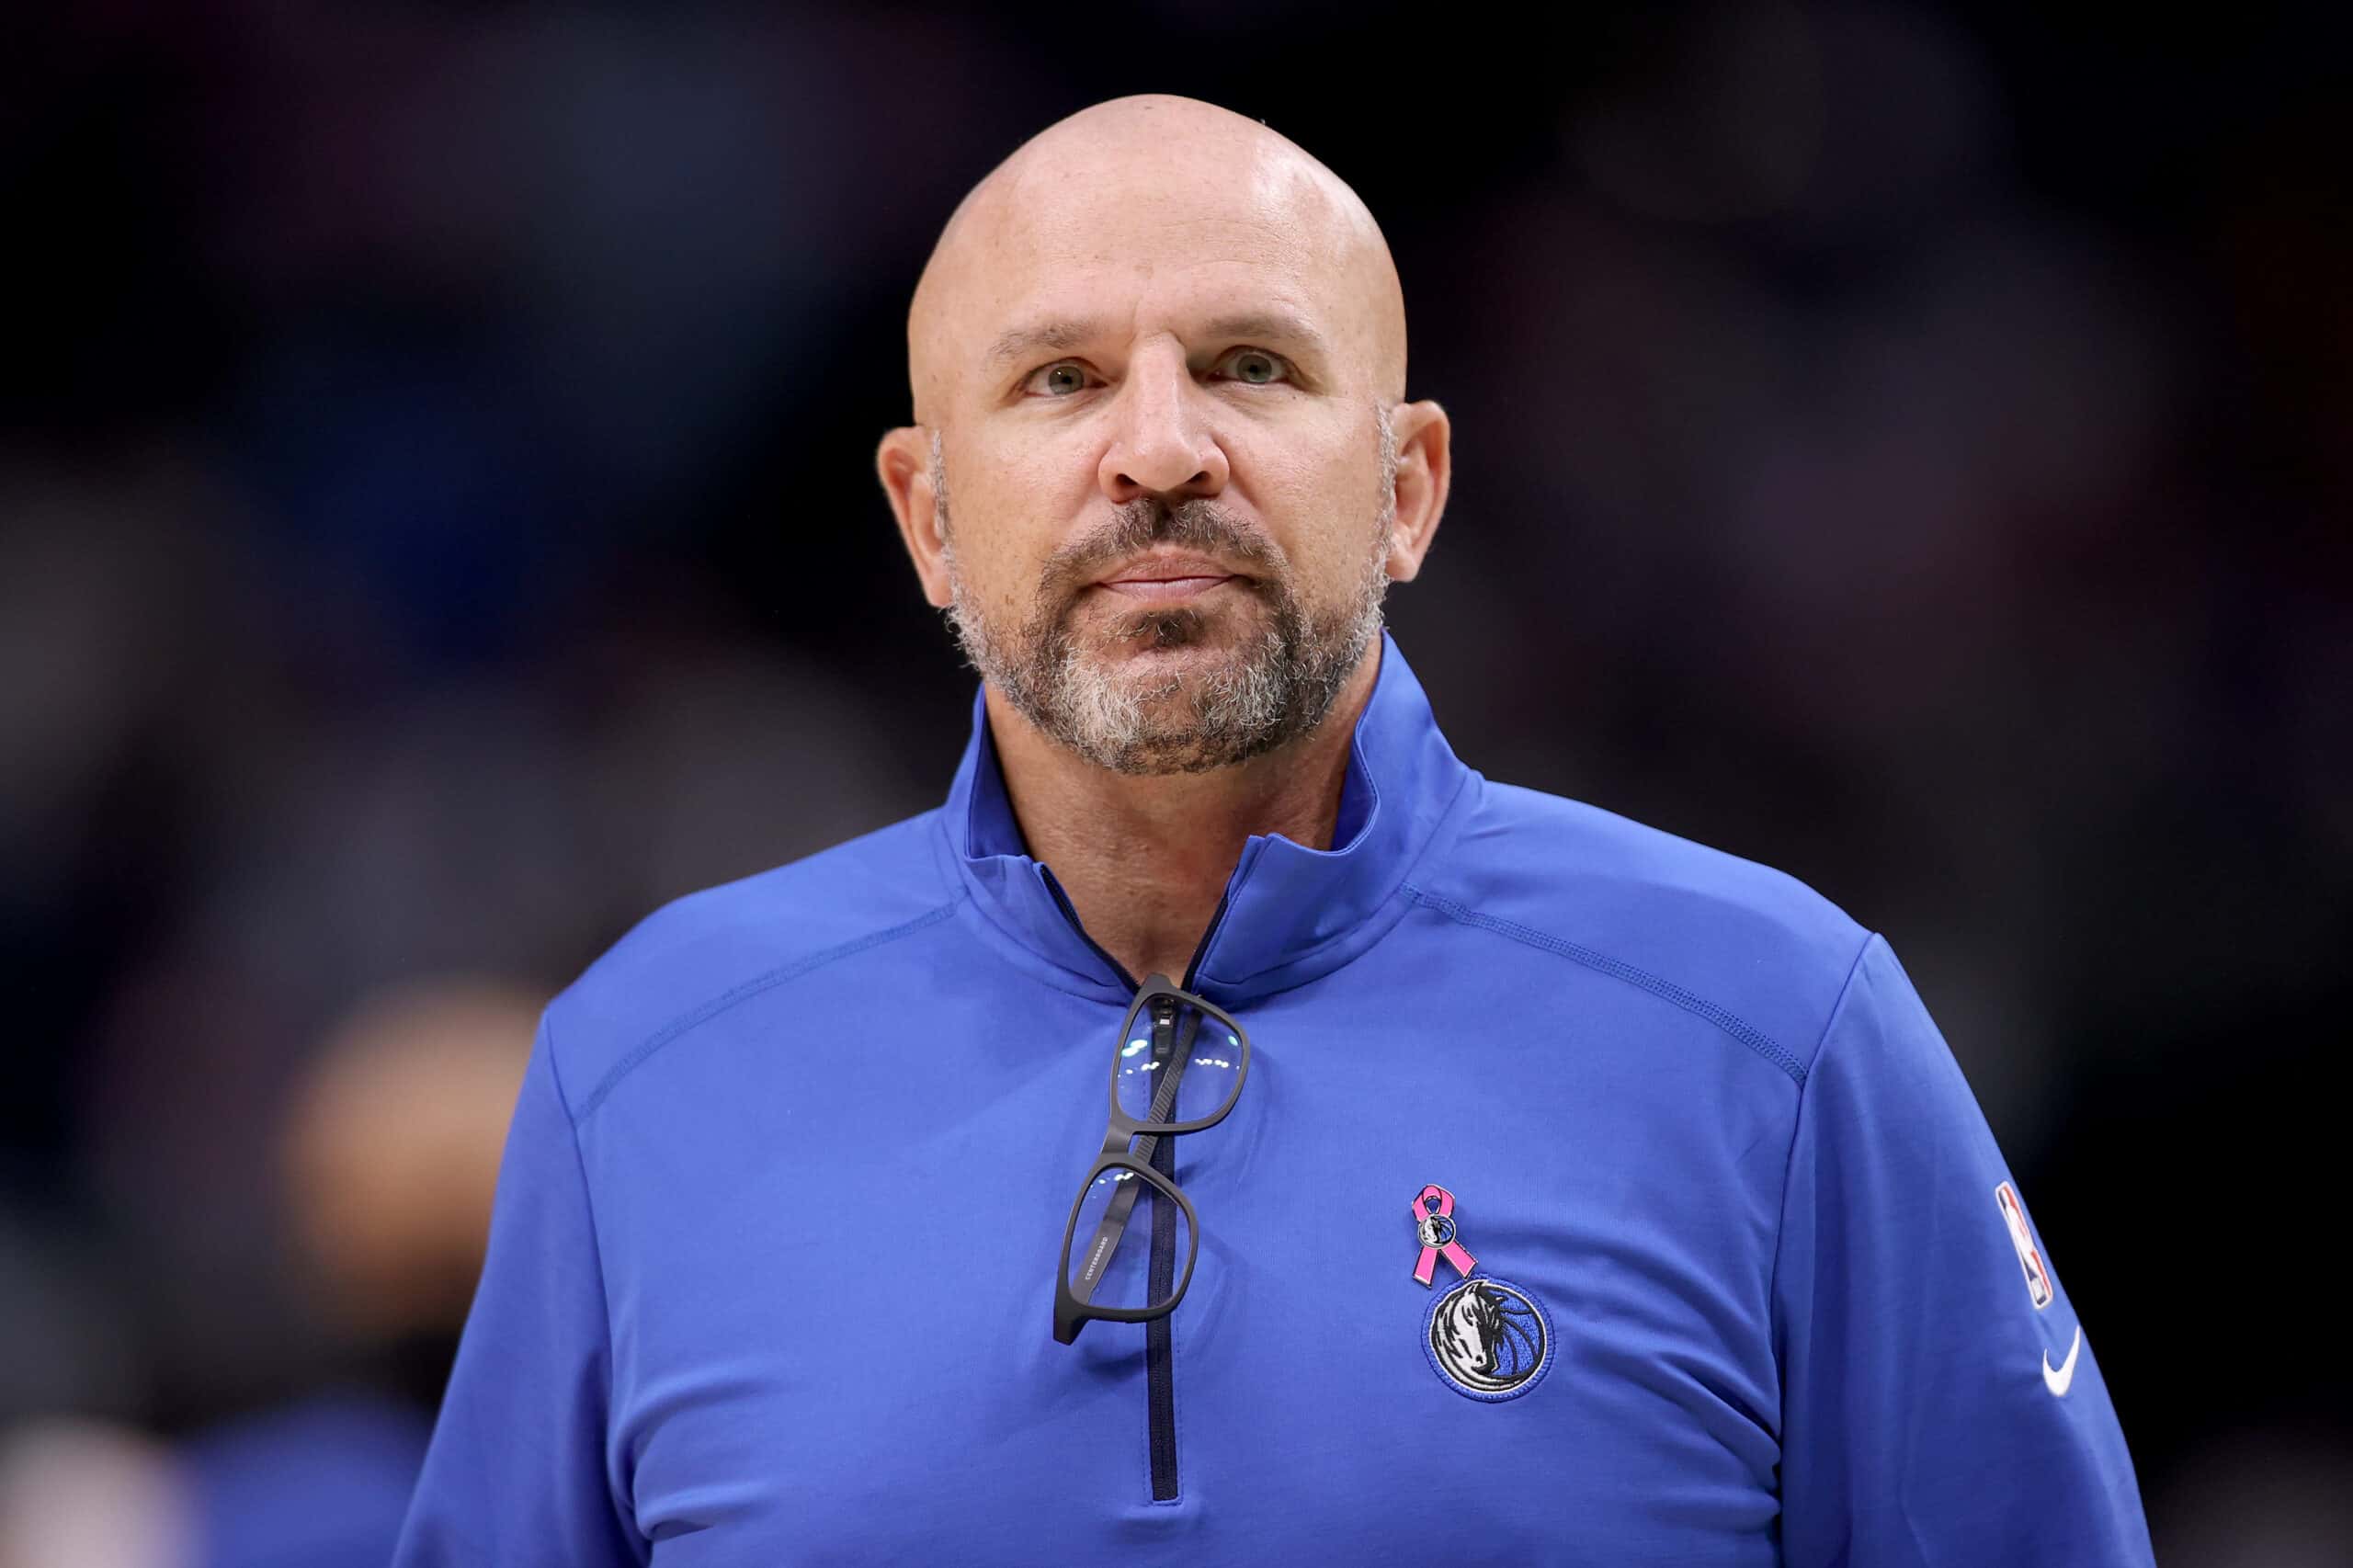 Is it time for Jason Kidd to be fired?